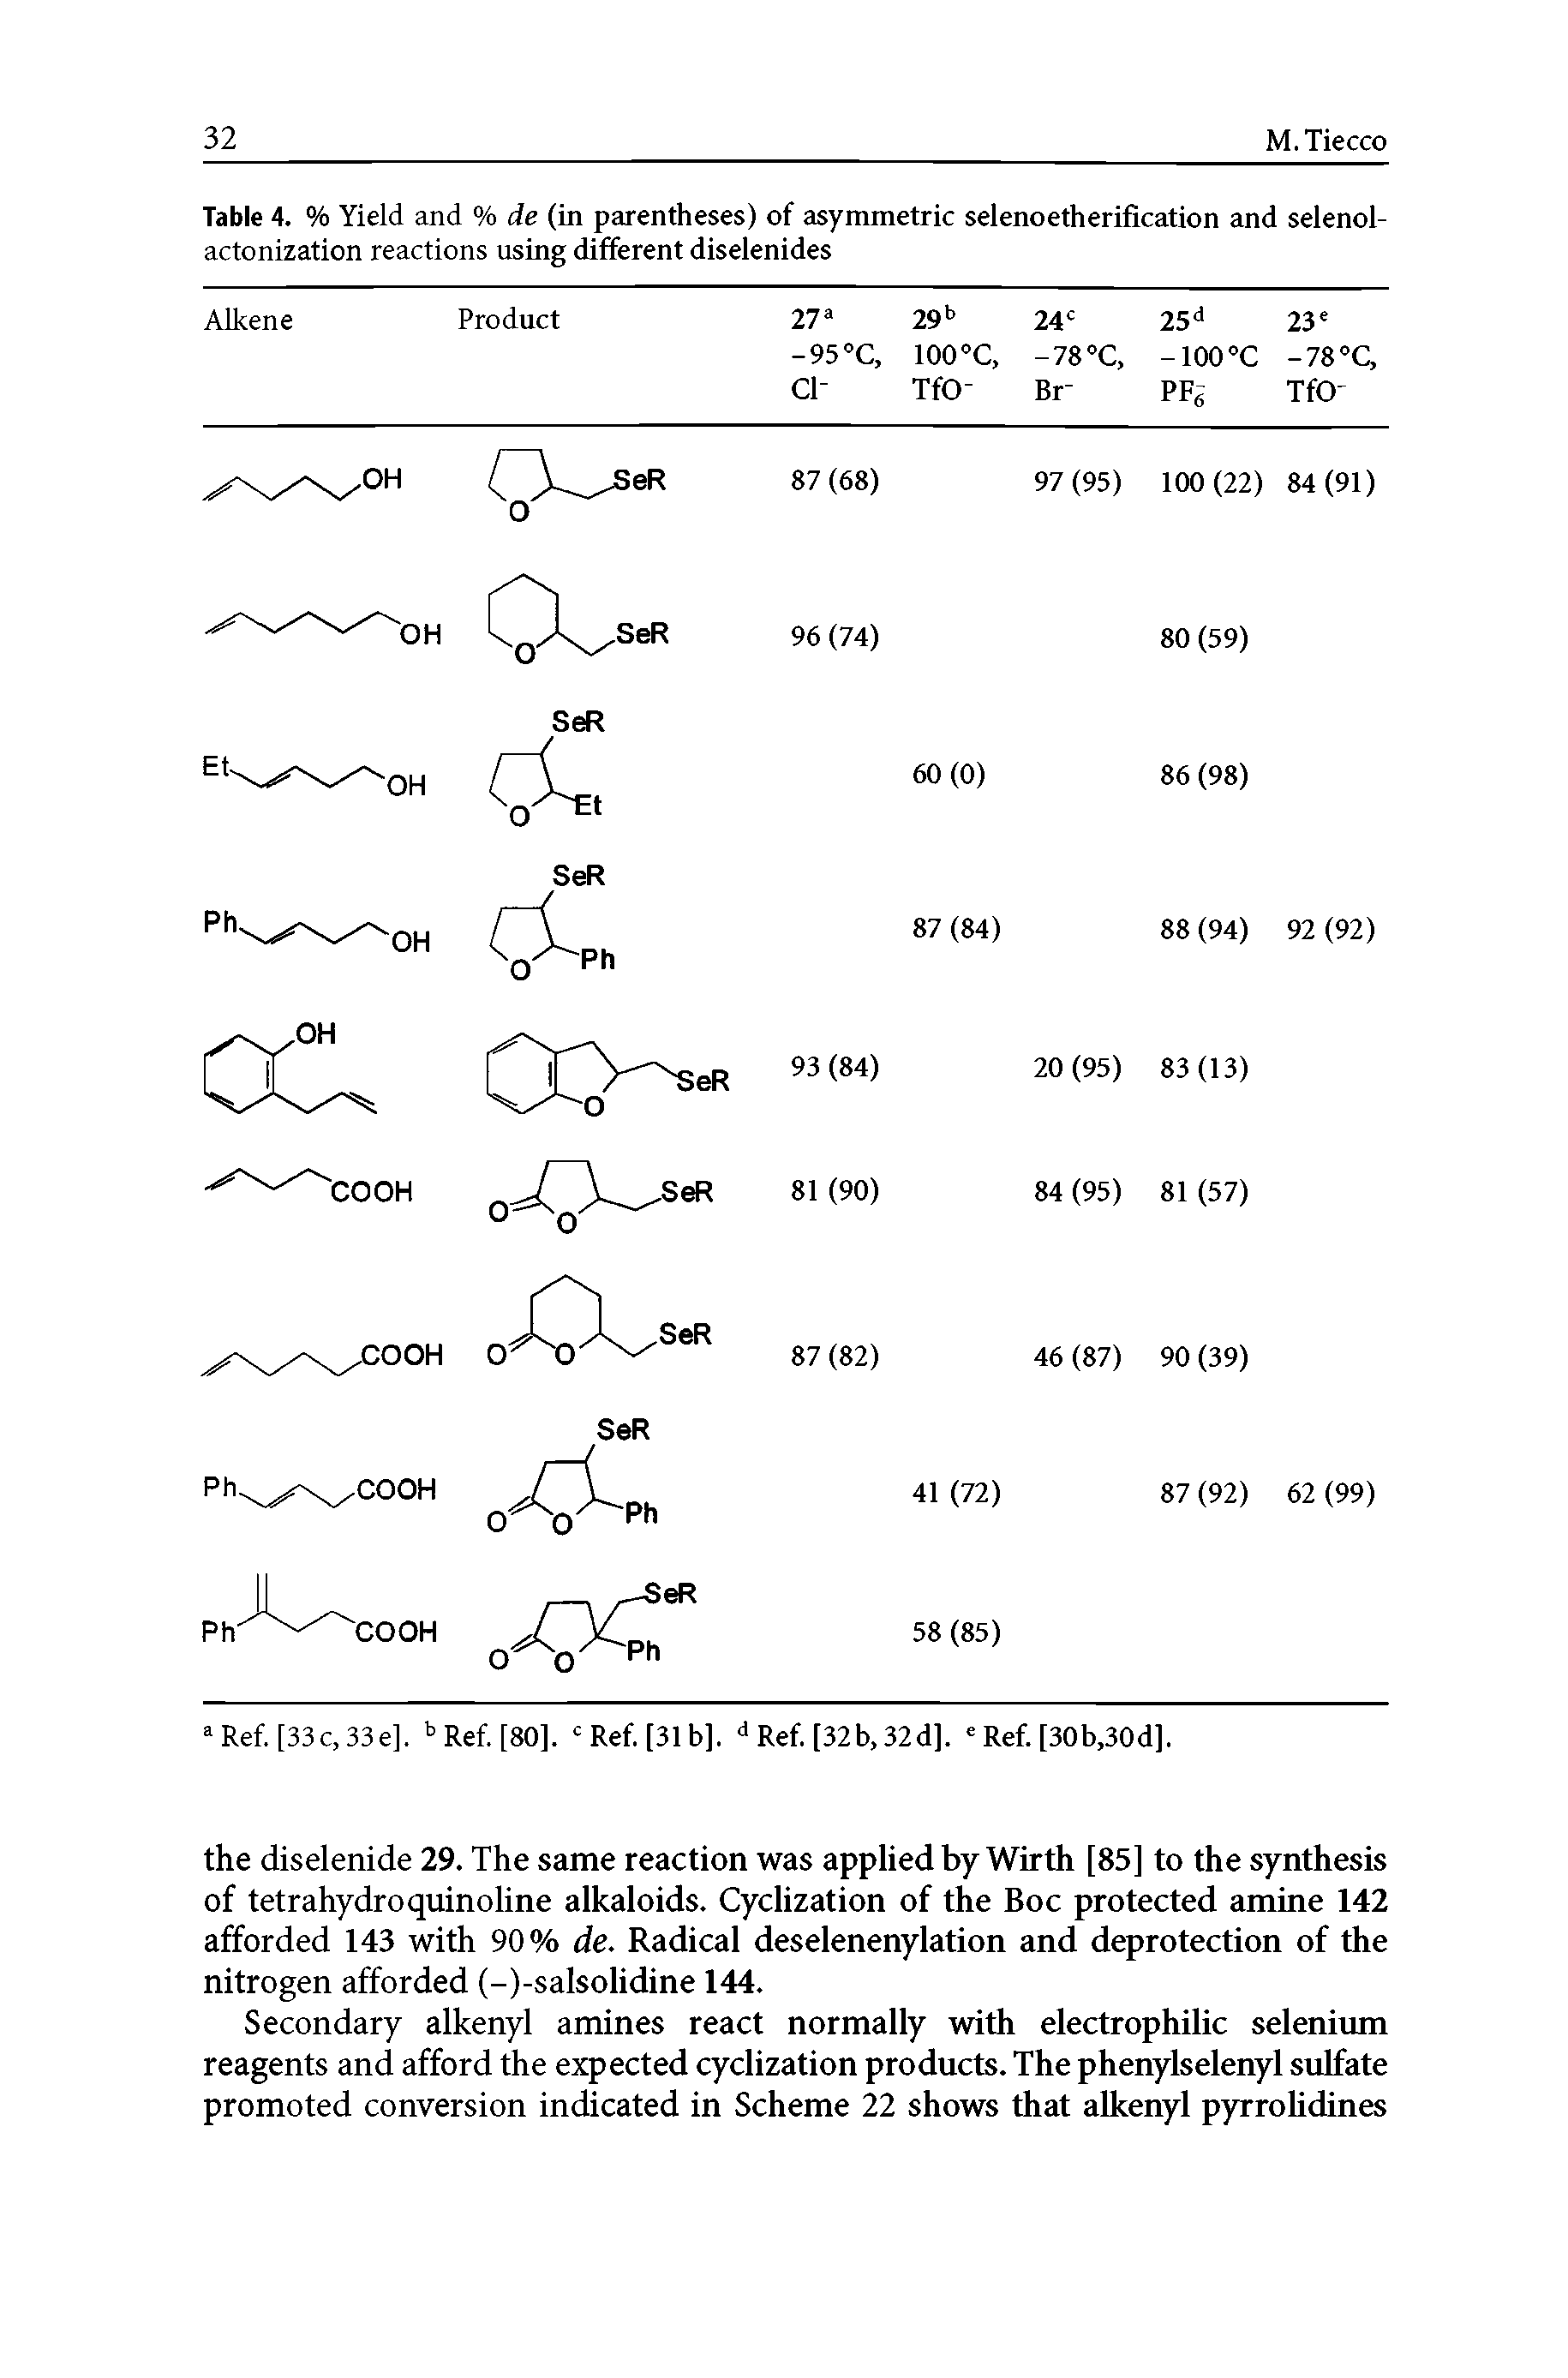 Table 4. % Yield and % de (in parentheses) of asymmetric selenoetherification and selenol-actonization reactions using different diselenides...